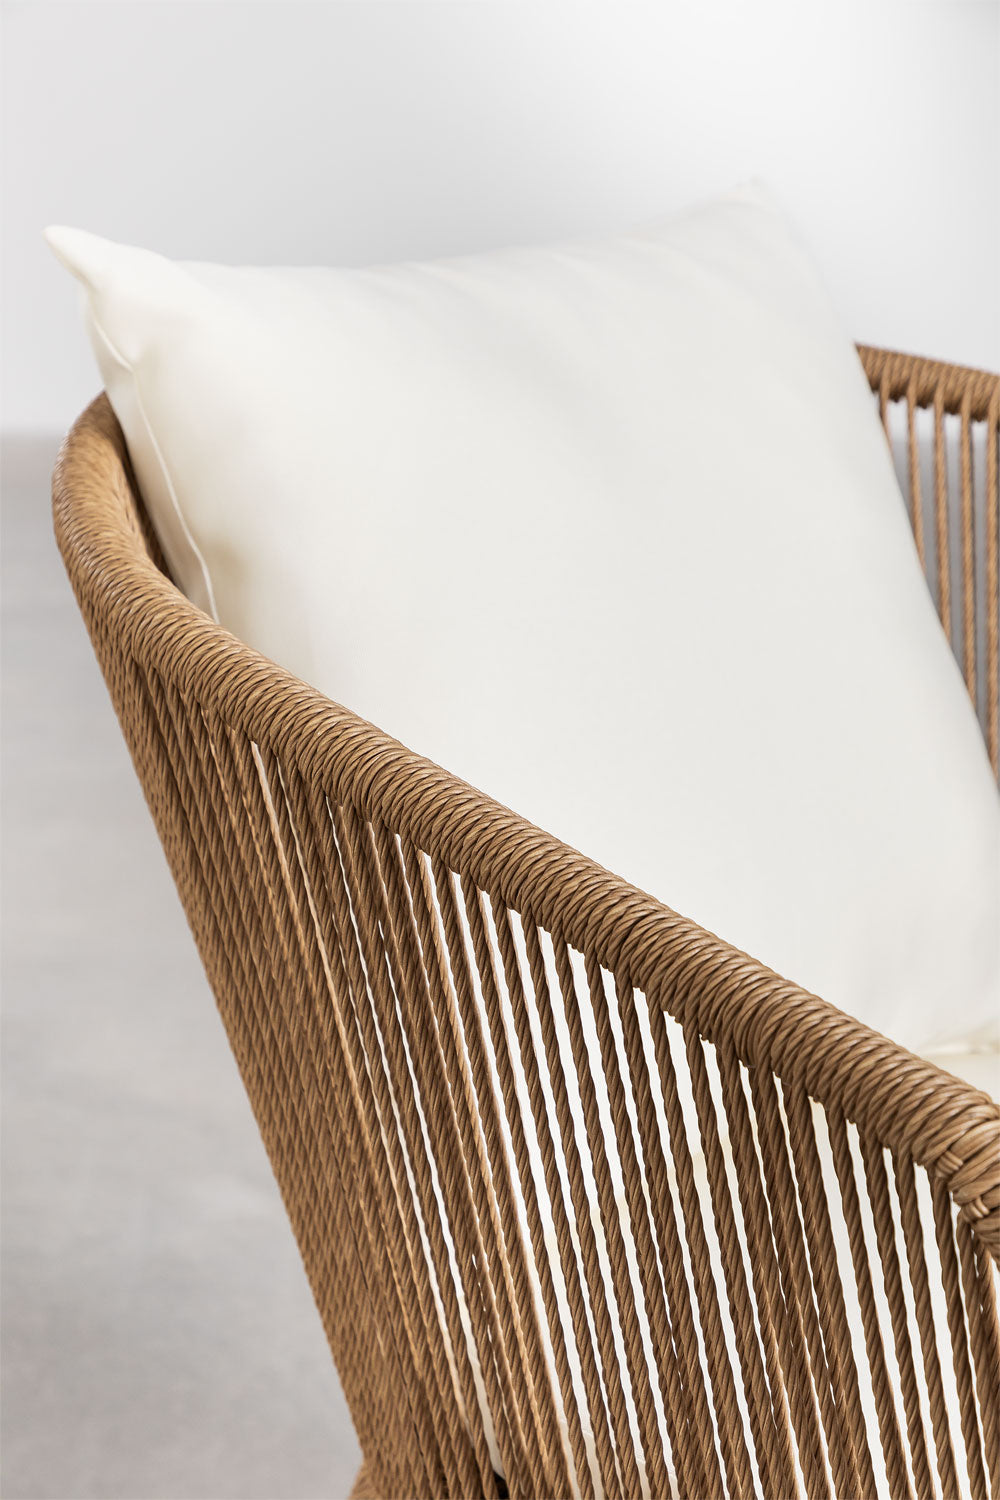 Cane chairs for Lounge | Bamboo Chairs for garden - Krisha - Akway